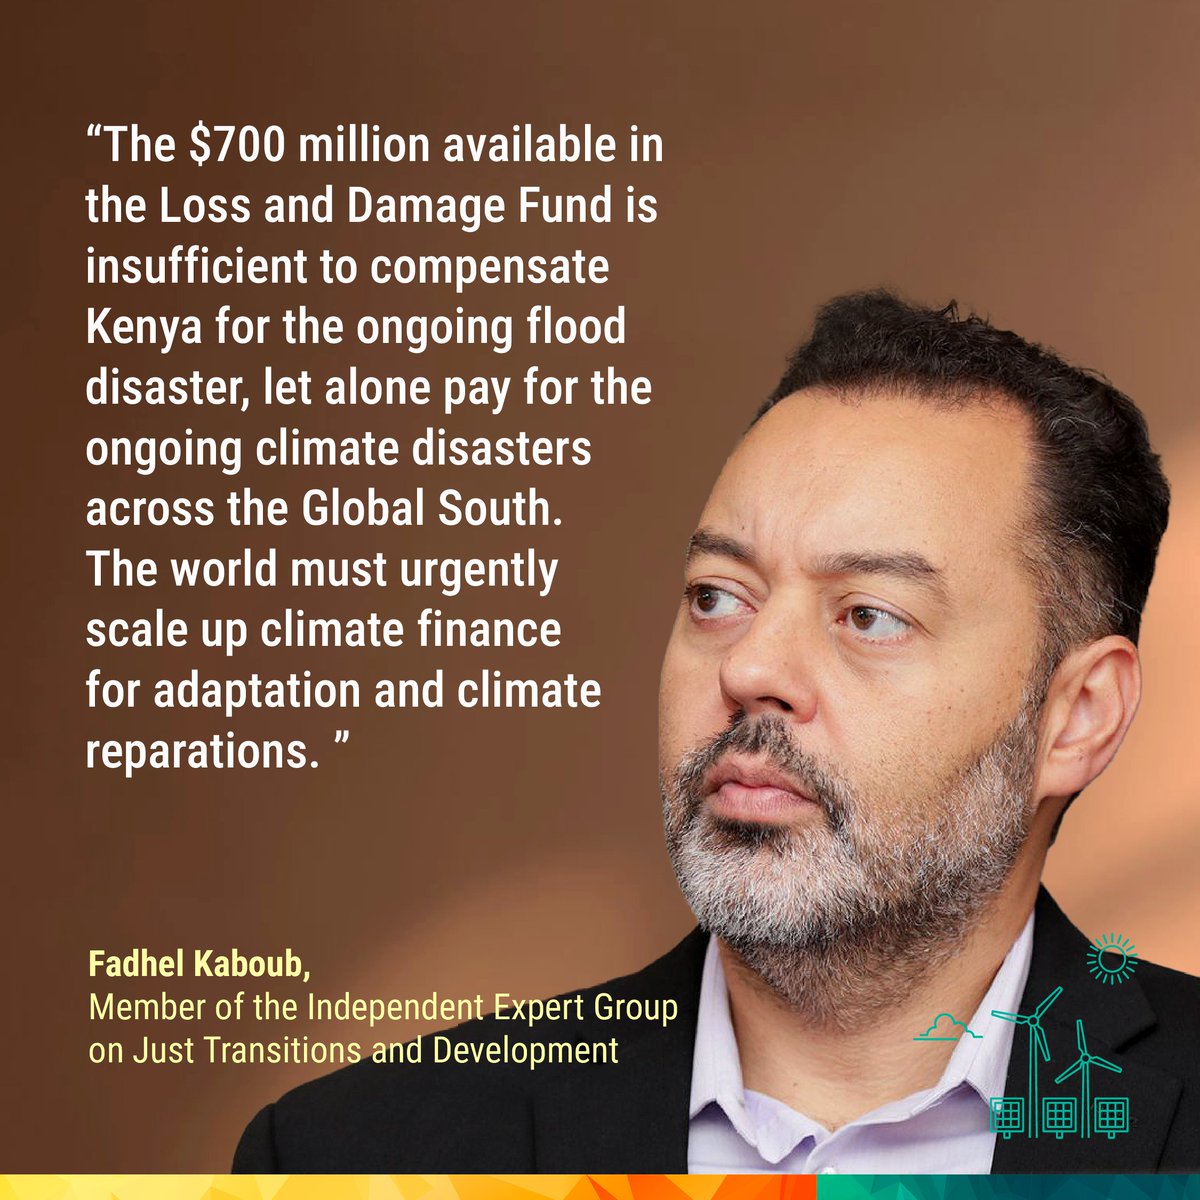 Fadhel Kaboub, member of the Independent Expert Group on Just Transitions and Development 'The $700 million available in the #LossandDamage Fund is insufficient to compensate Kenya for the ongoing #flood disaster alone, let alone pay for the ongoing #climate disasters across the